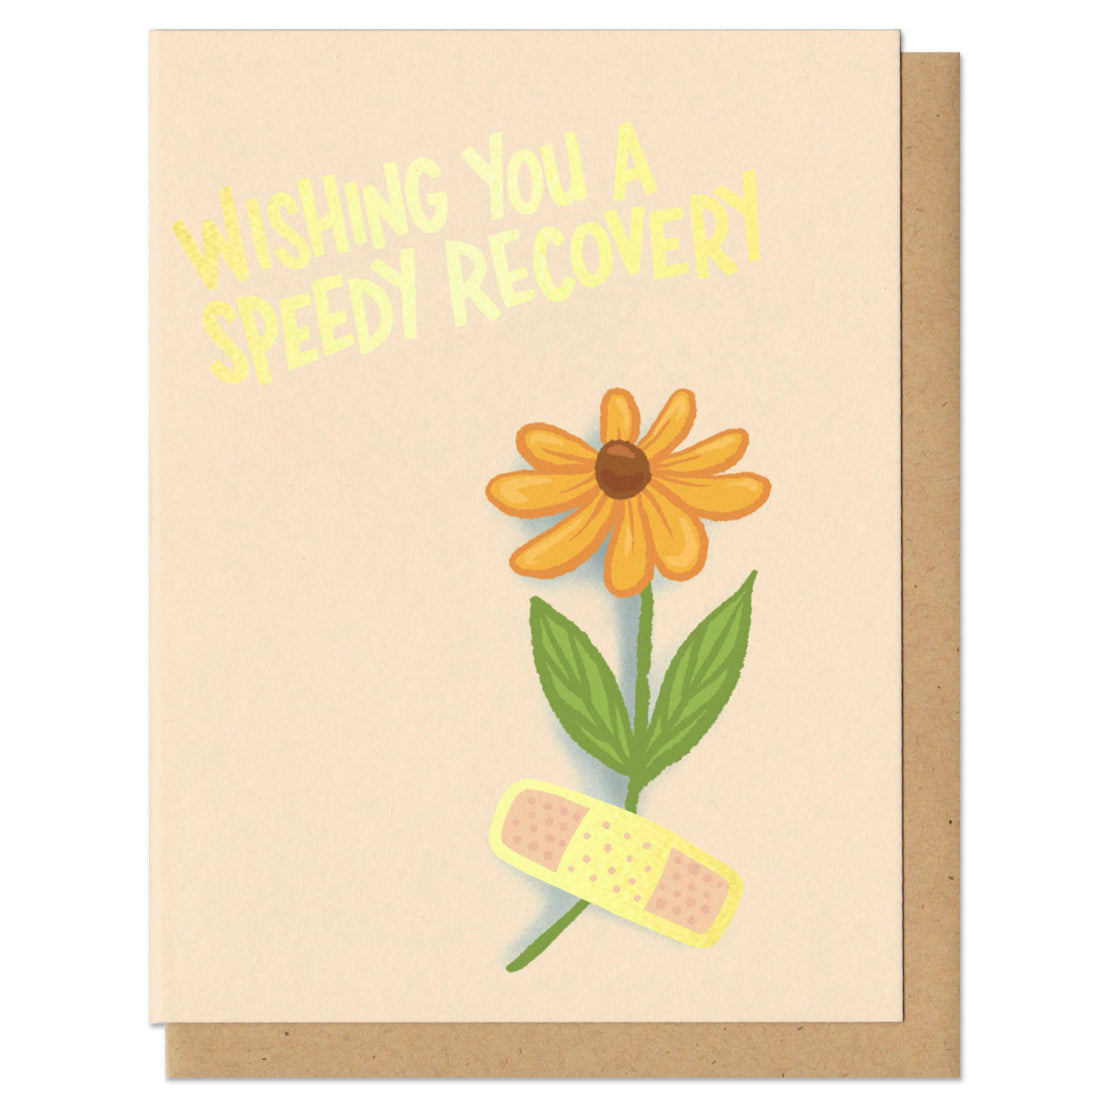 Wishing You A Speedy Recovery Card by Frog & Toad – Outer Layer